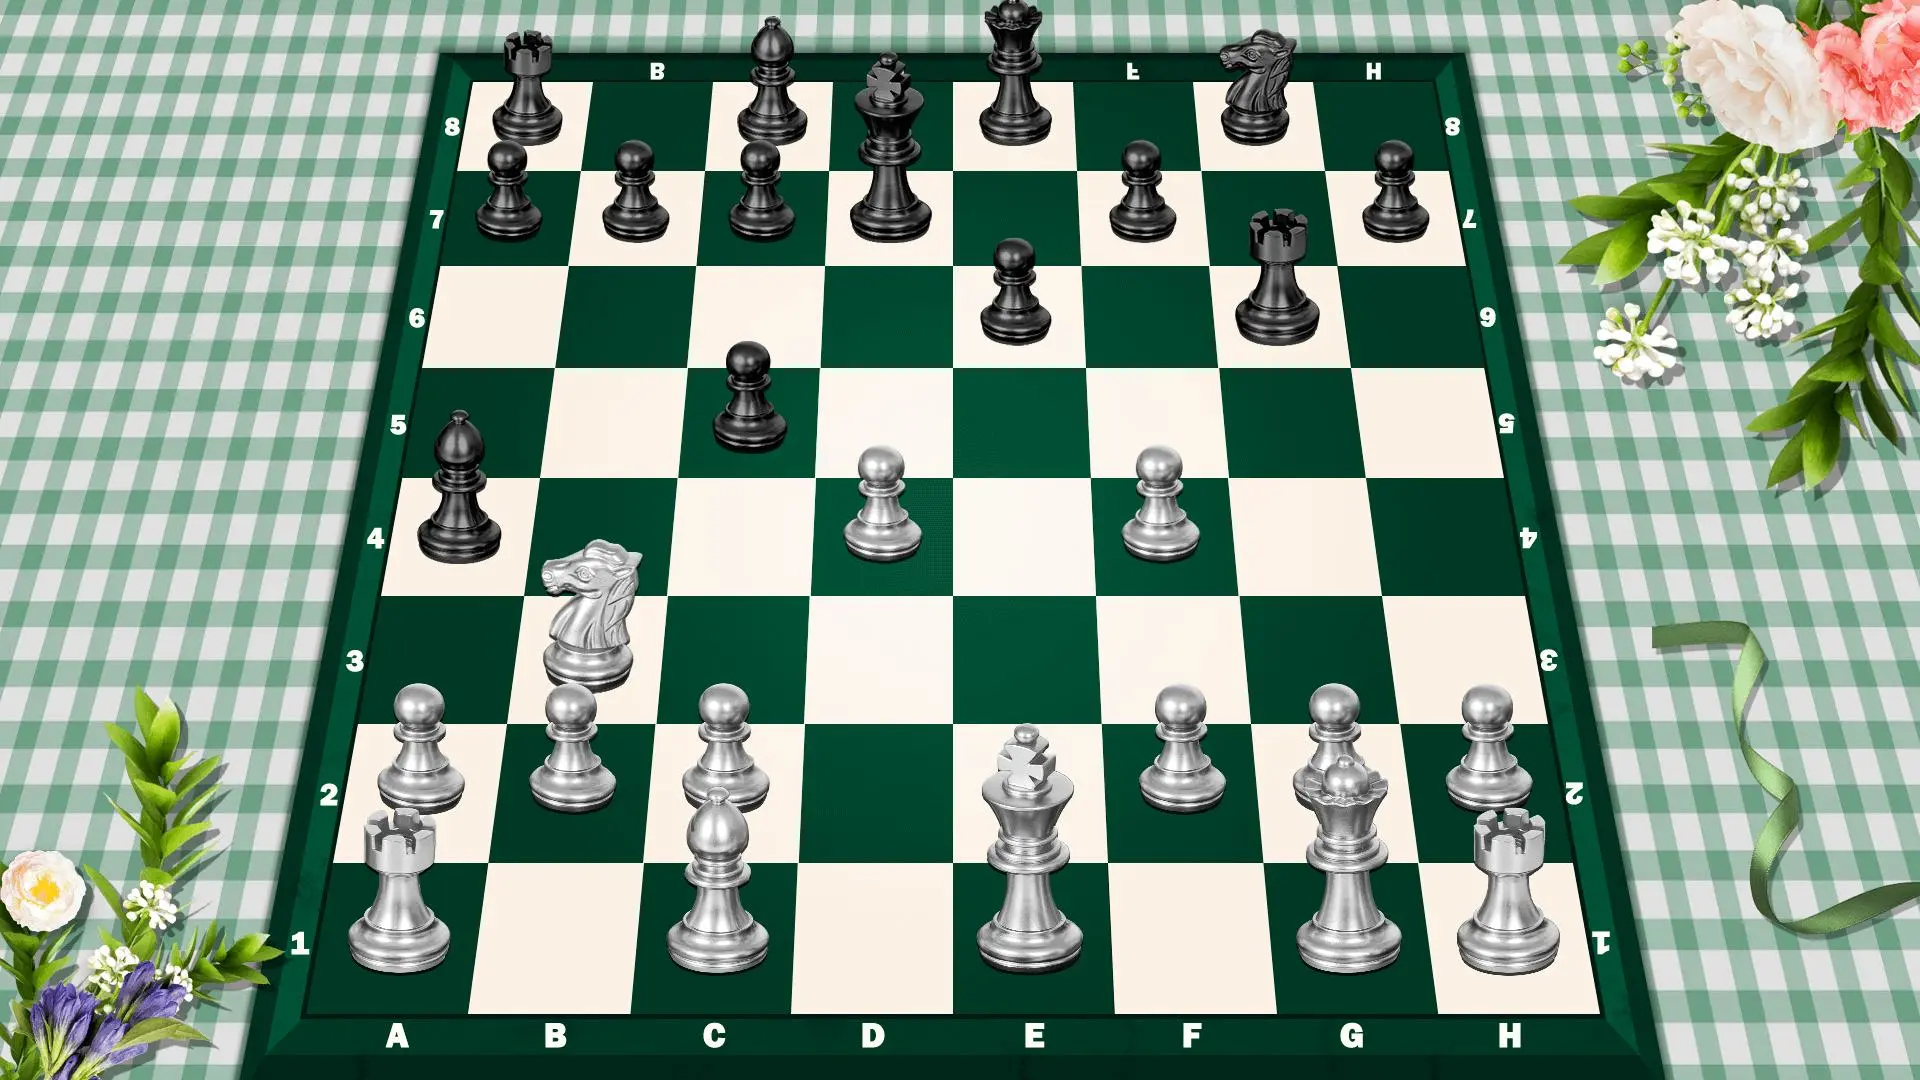 Play Chess - Offline Board Game Online for Free on PC & Mobile